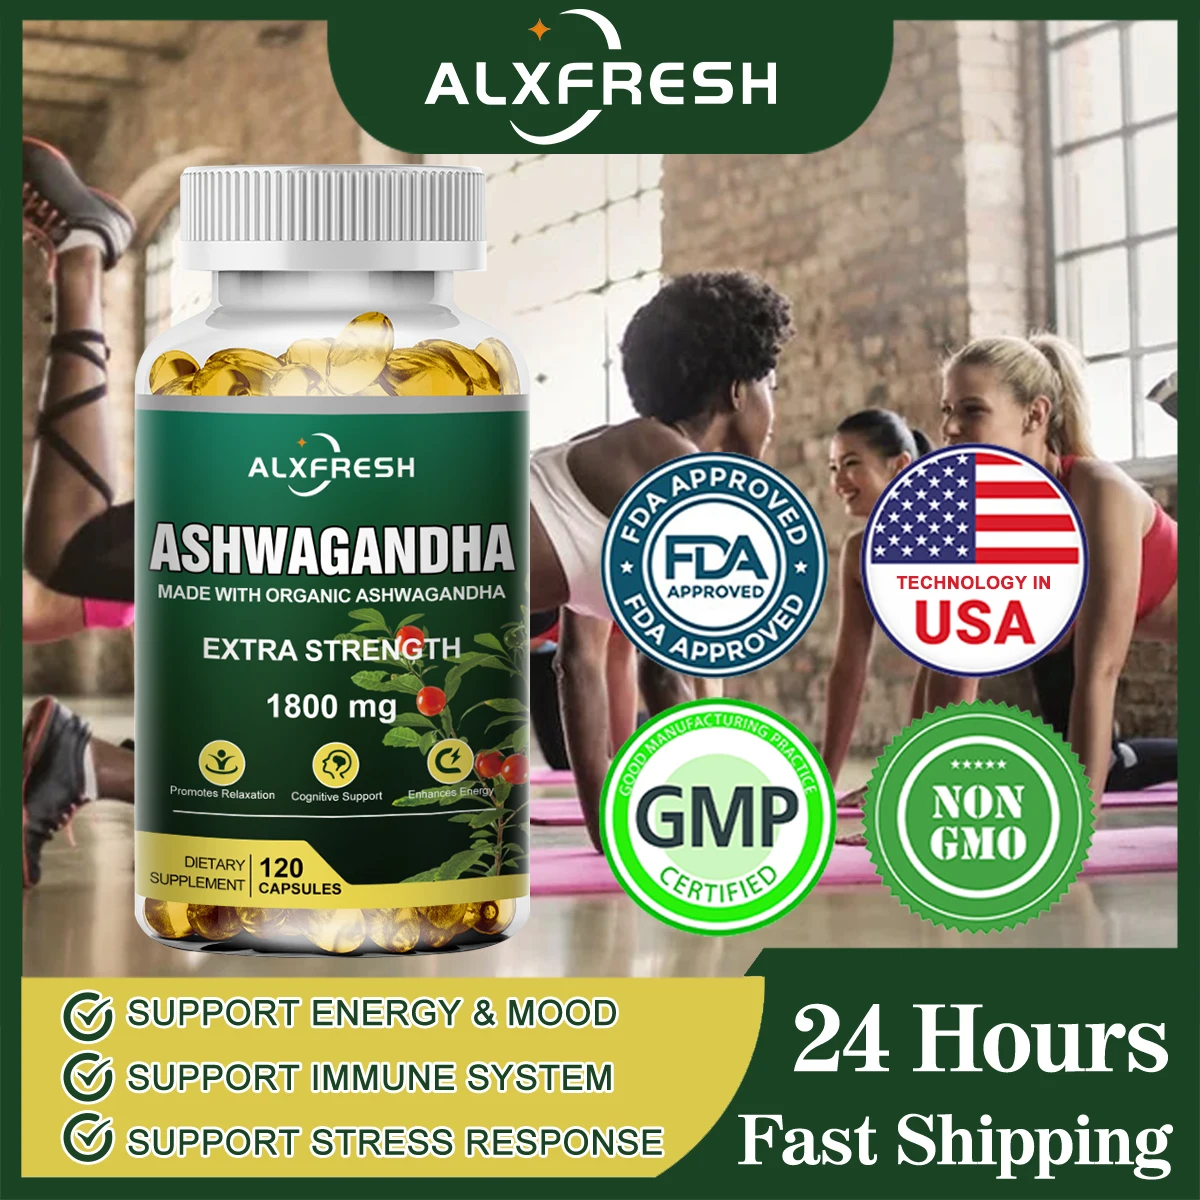 

Alxfresh Pure Organic Ashwagandha Extract Capsule 1800mg| Potent Concentrated Extract | Maximum Strength Formula | Non-GMO Vegan